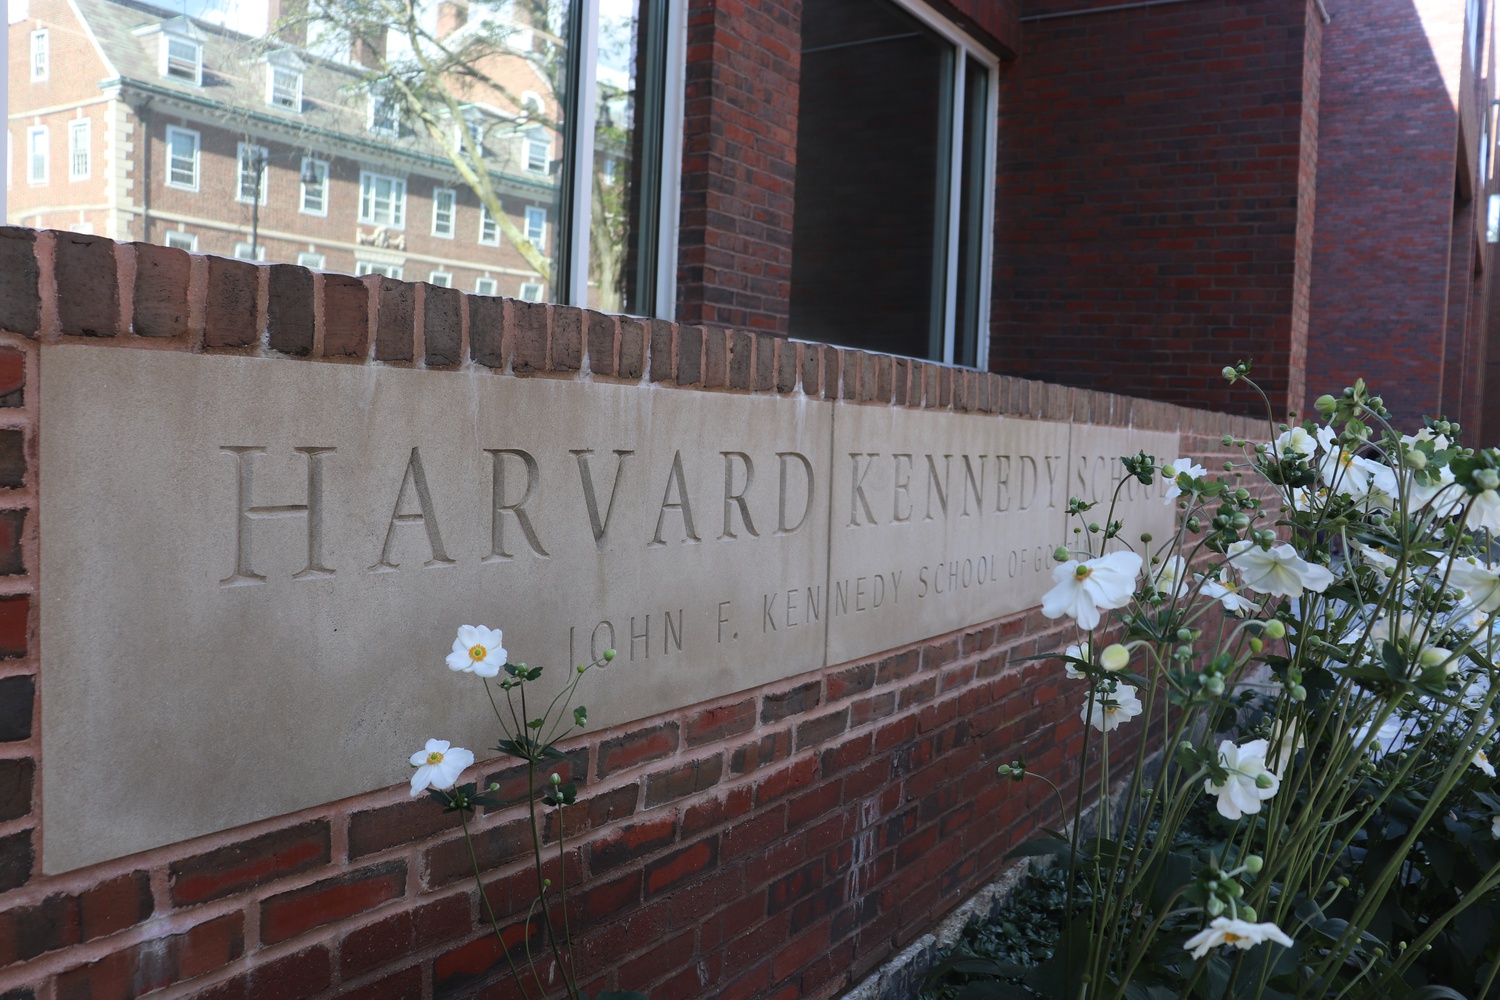 The Wexner Foundation, which donated to the Harvard Kennedy School and supported fellows to study at the school, announced that it would cut ties with the University due to its response to the attack on Israel by Hamas.